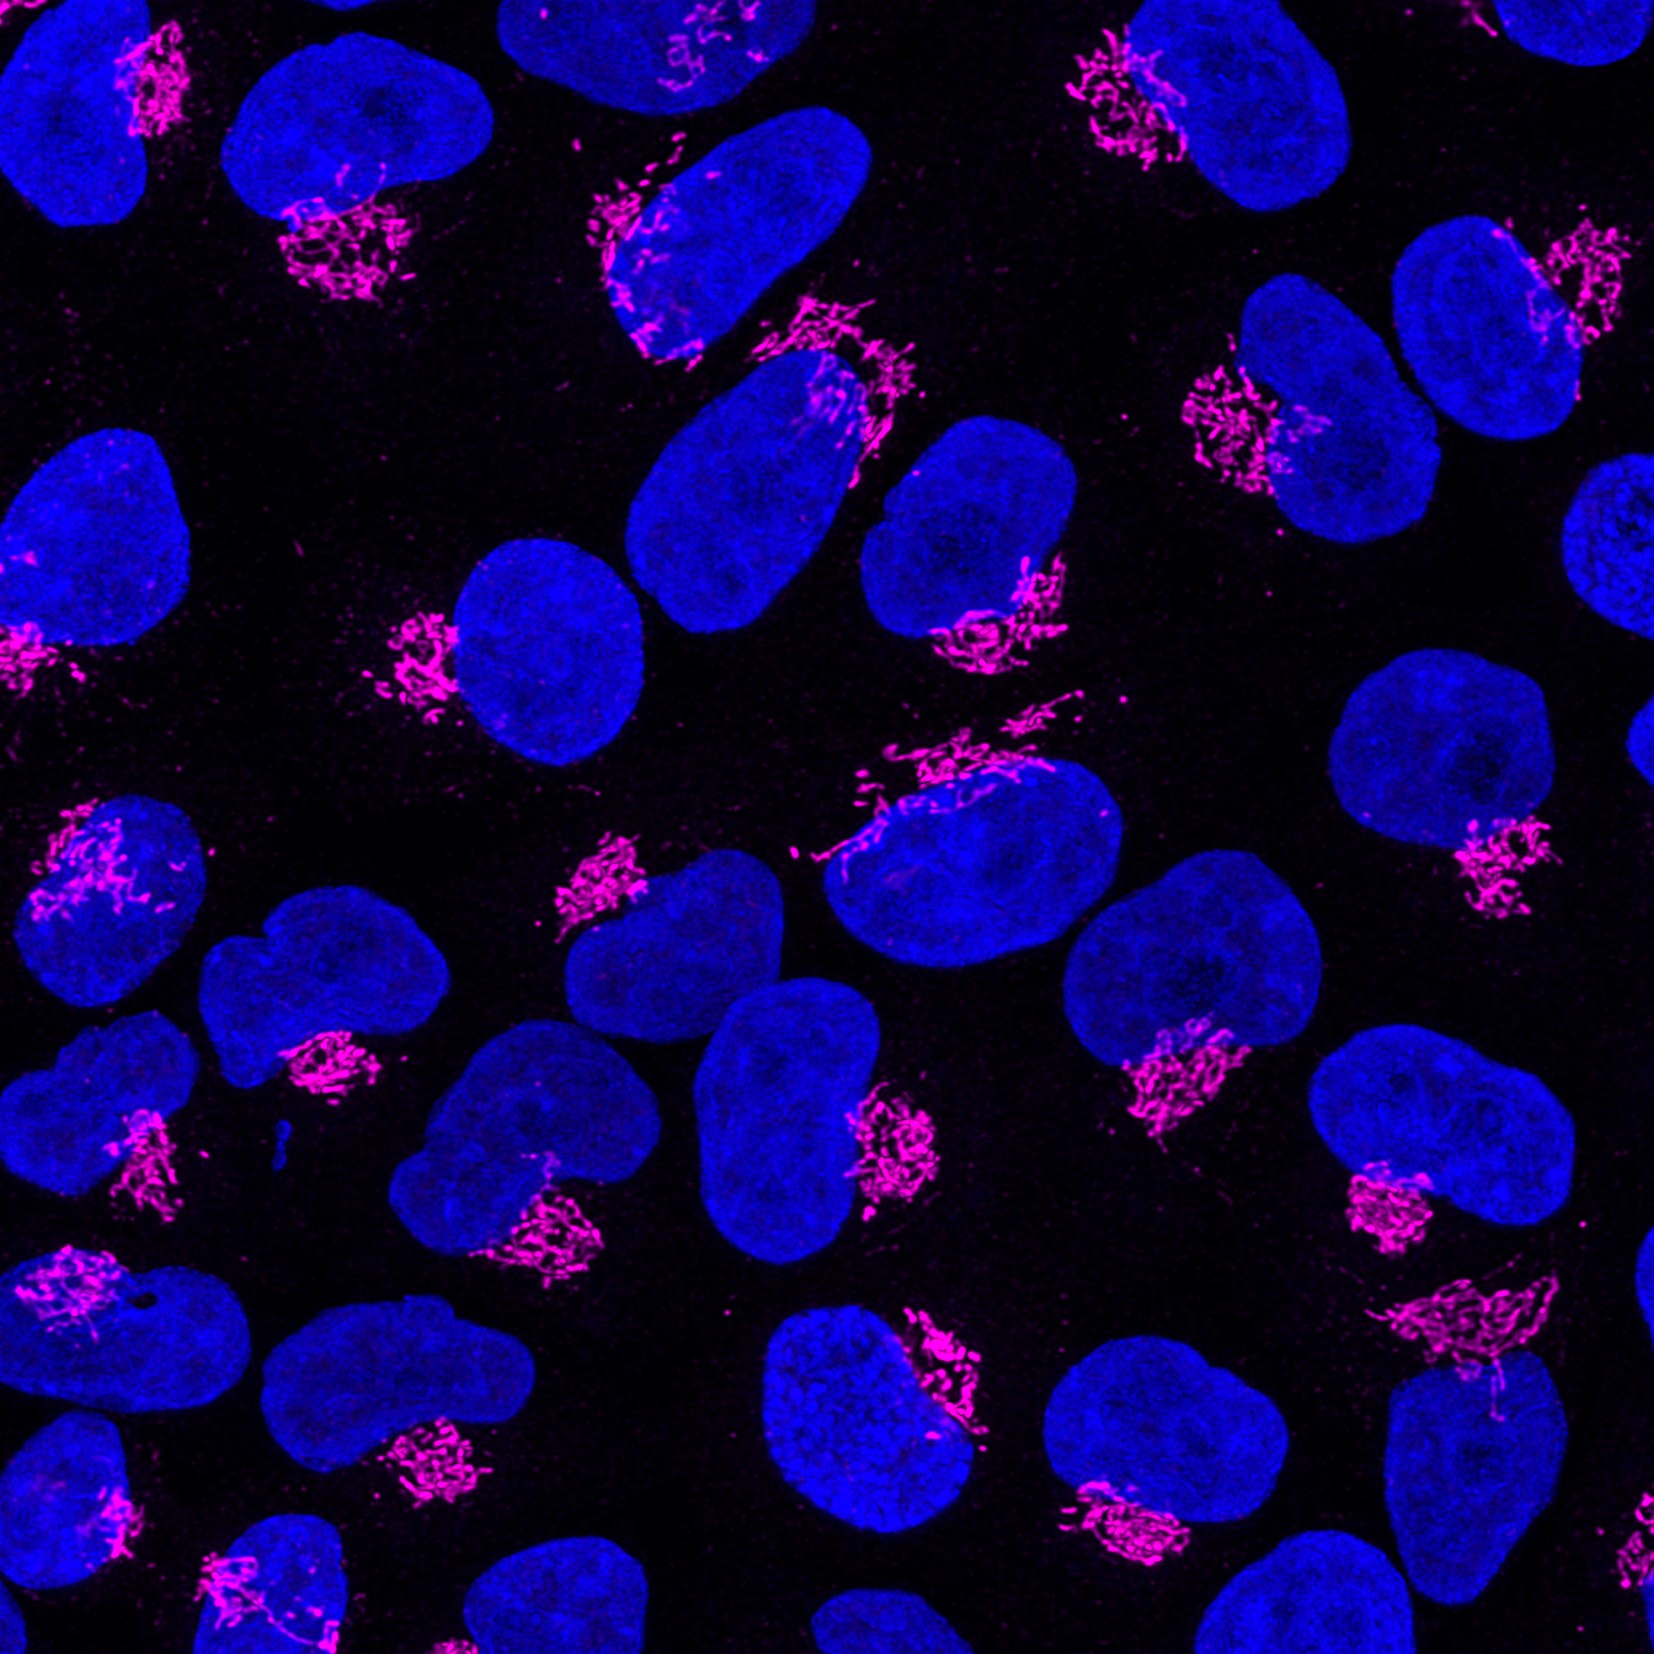 Immunofluorescence of Hela cells: Hela cells were fixed with 4% PFA and stained with Rabbit anti-GM130 polyclonal antibody (11308-1-AP, 1:200) Multi-rAb CoraLite® Plus 647 conjugated Goat Anti-Rabbit Recombinant Secondary Antibody (H+L) (RGAR005,1:800) was used for detection. Nucleus was stained with DAPI (blue).
    The experiment was performed in Chromotek’s lab and image was recorded at the Core Facility Bioimaging at the Biomedical Center, LMU Munich.